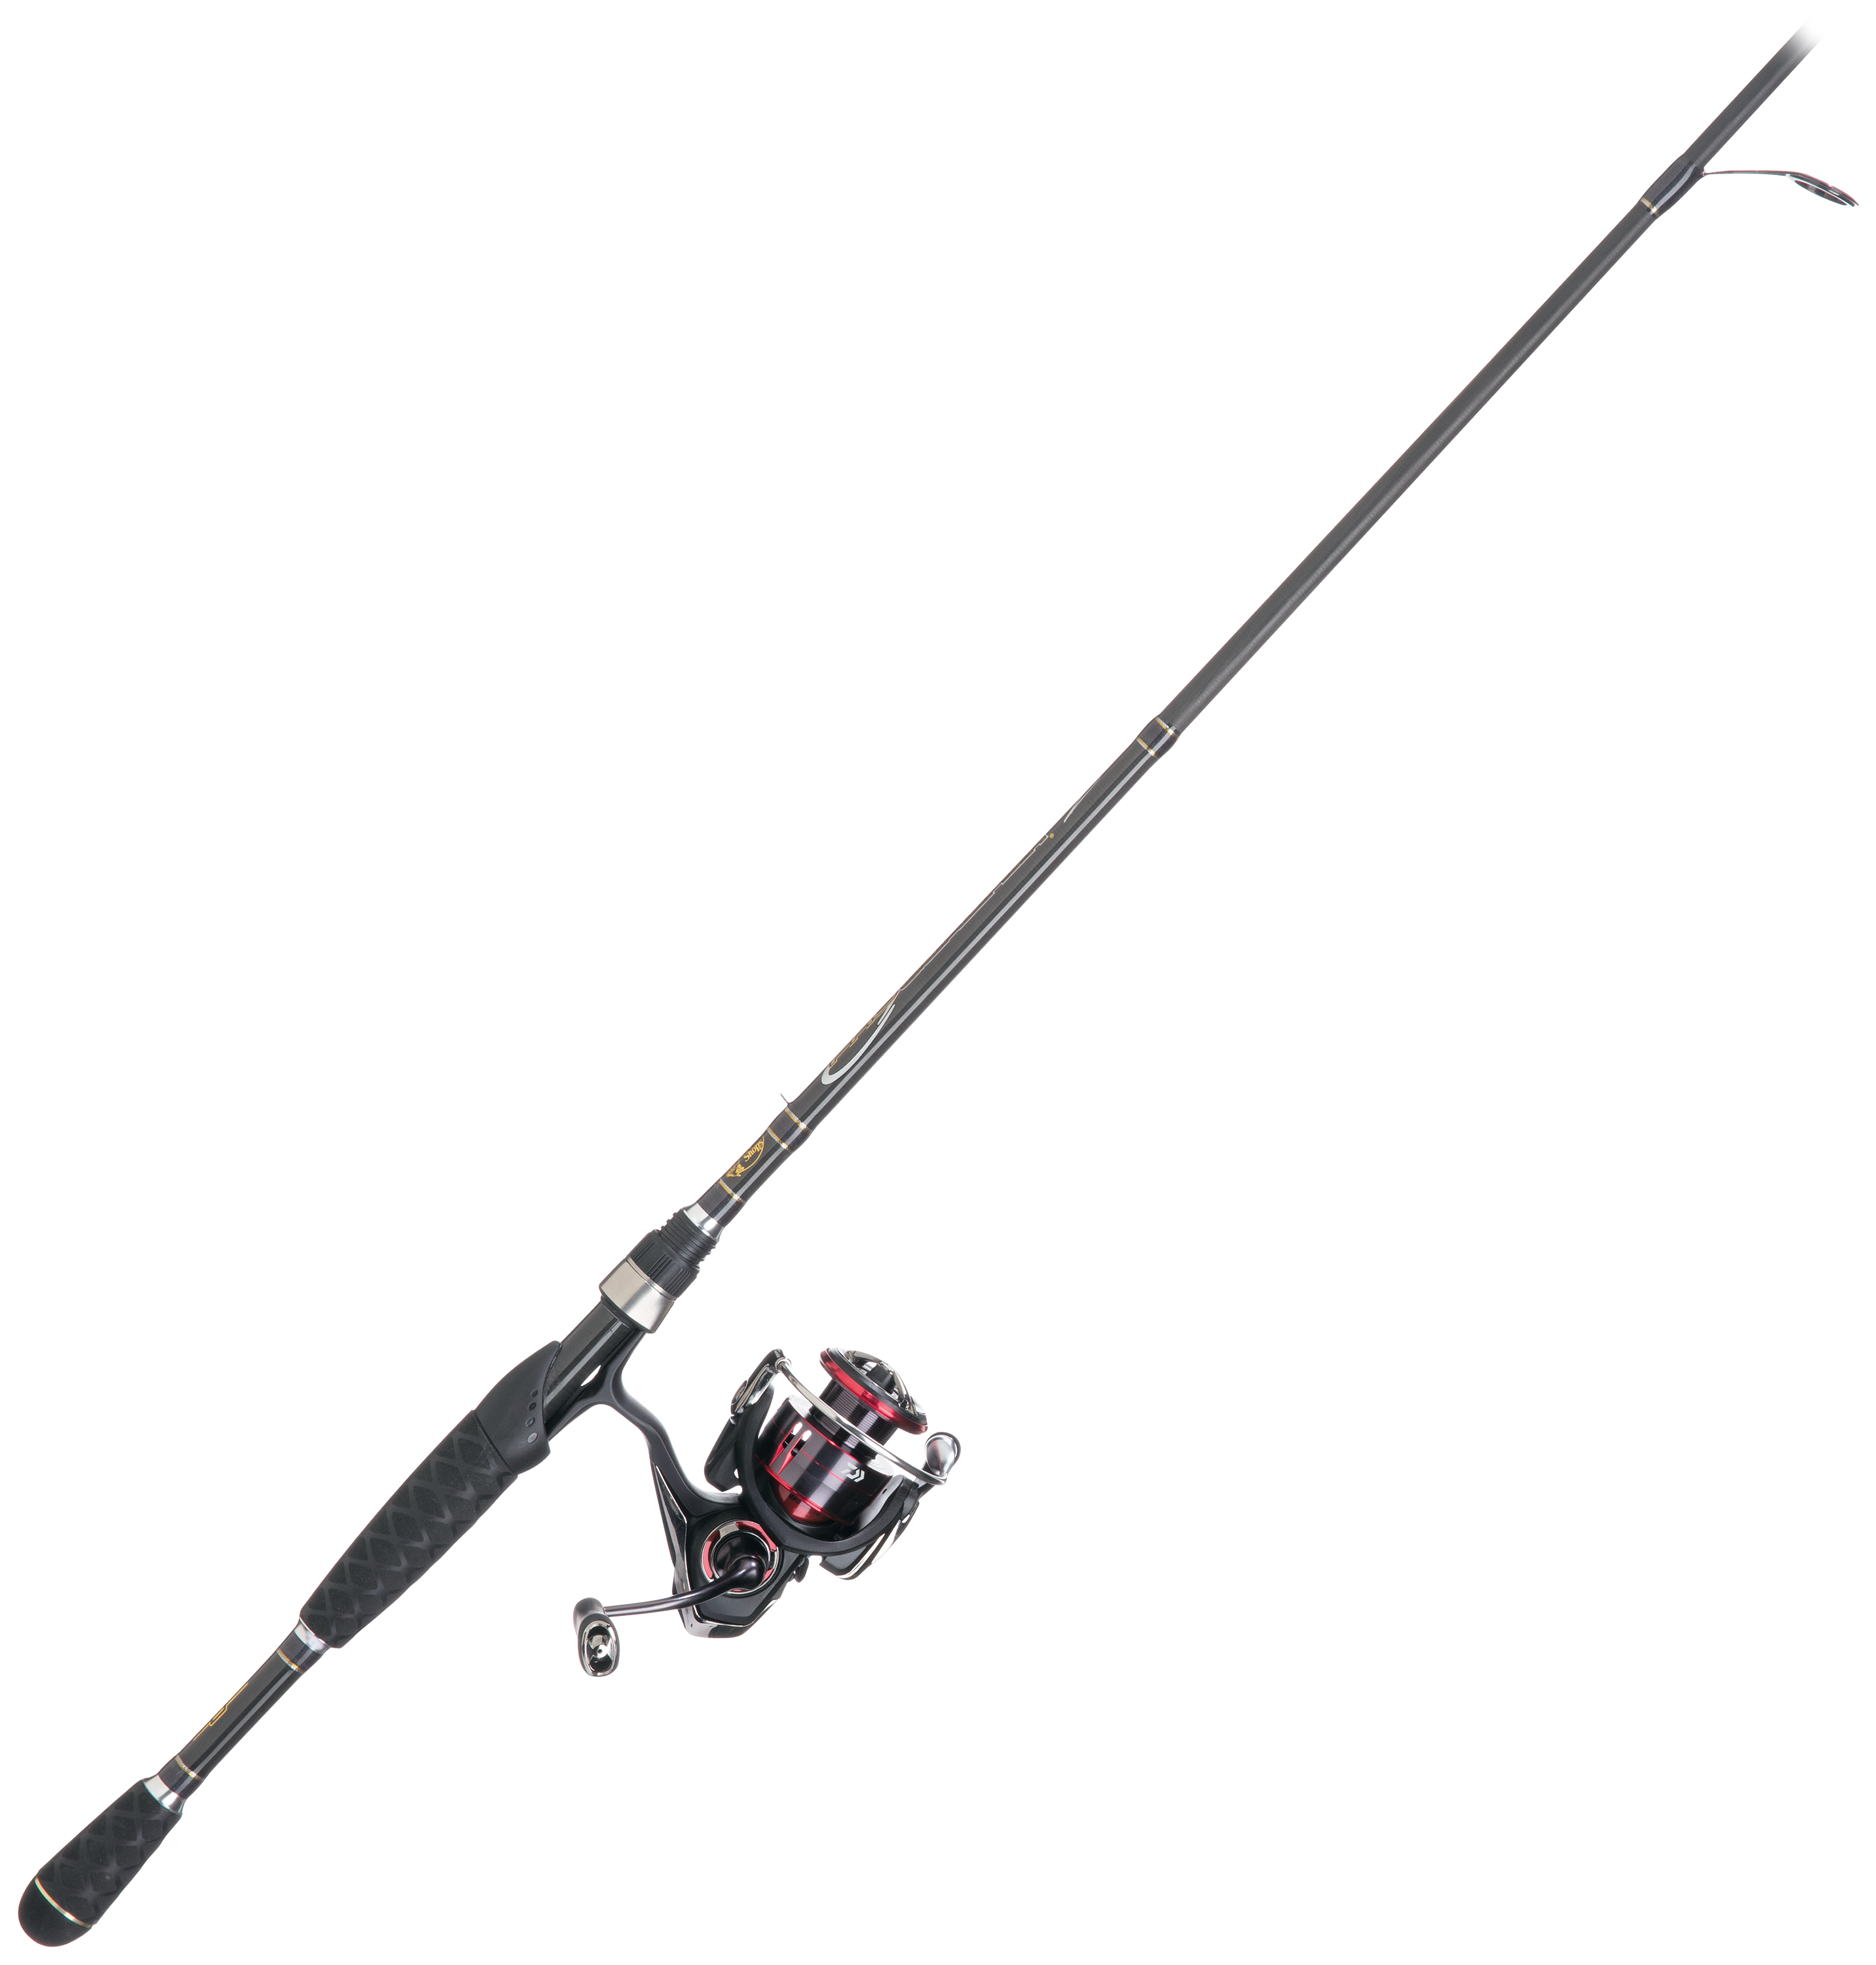 Daiwa Fuego LT/Bass Pro Shops Pro Qualifier 2 Spinning Rod and Reel Combo - FGLT2500D-XH/PQ7M